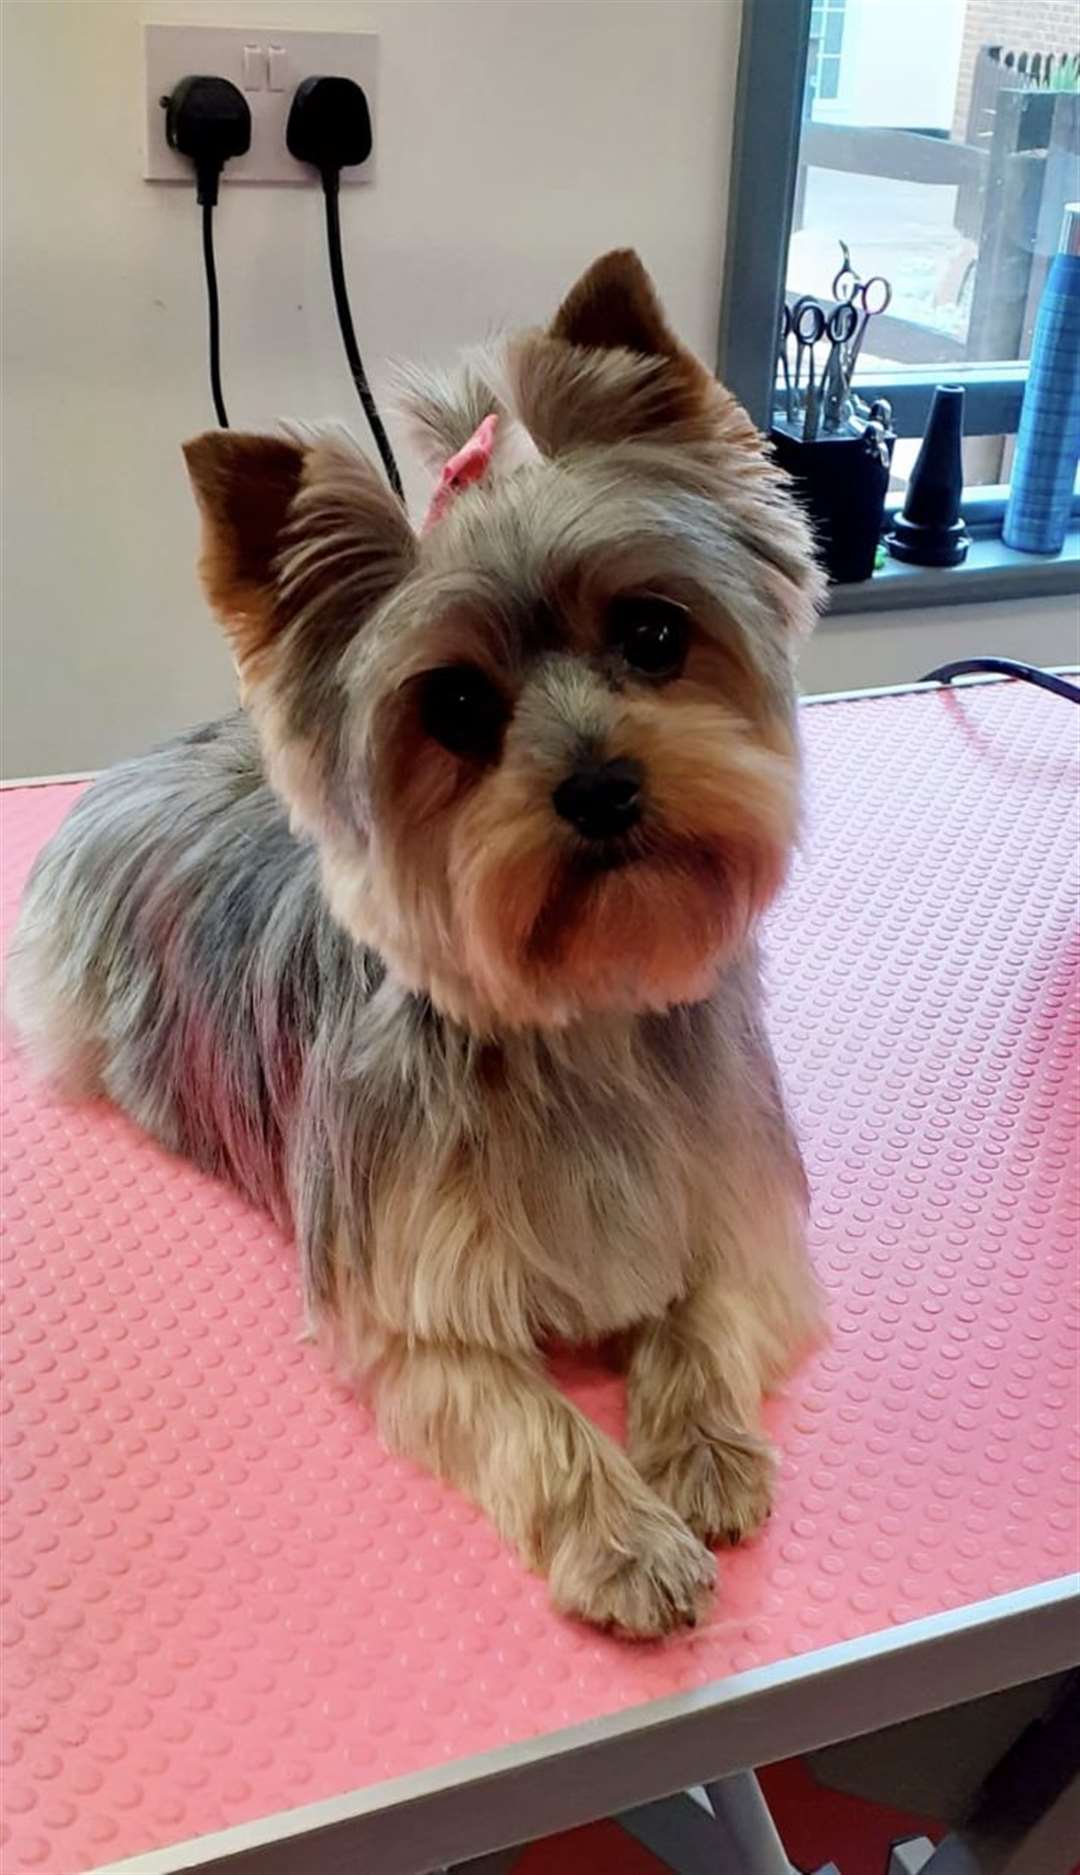 Boo is a two-year-old Yorkshire terrier